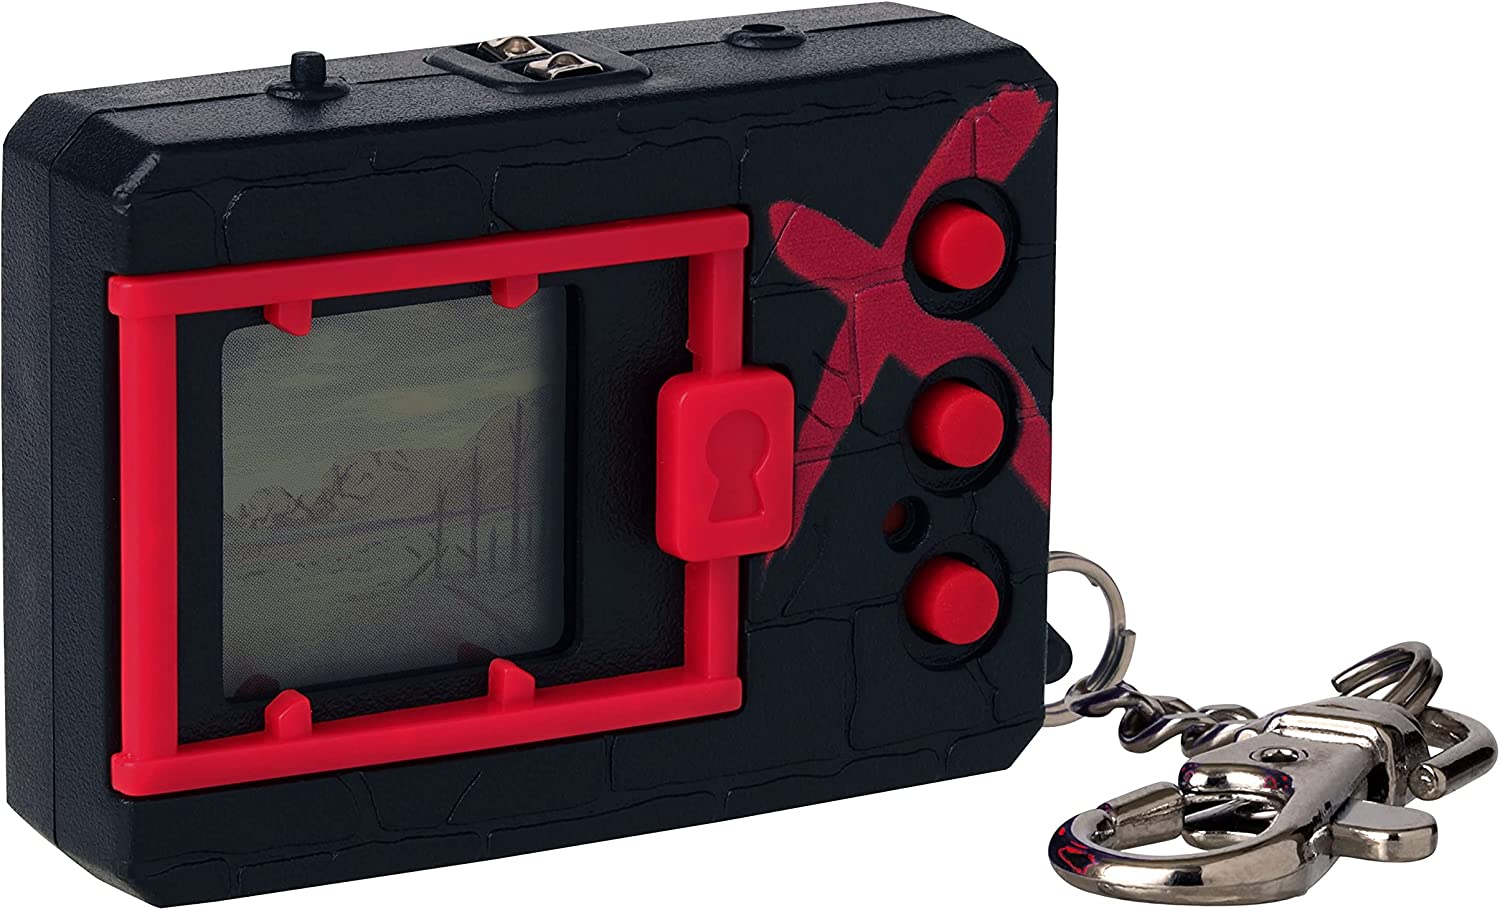 Digimon X (Black & Red) image count 1